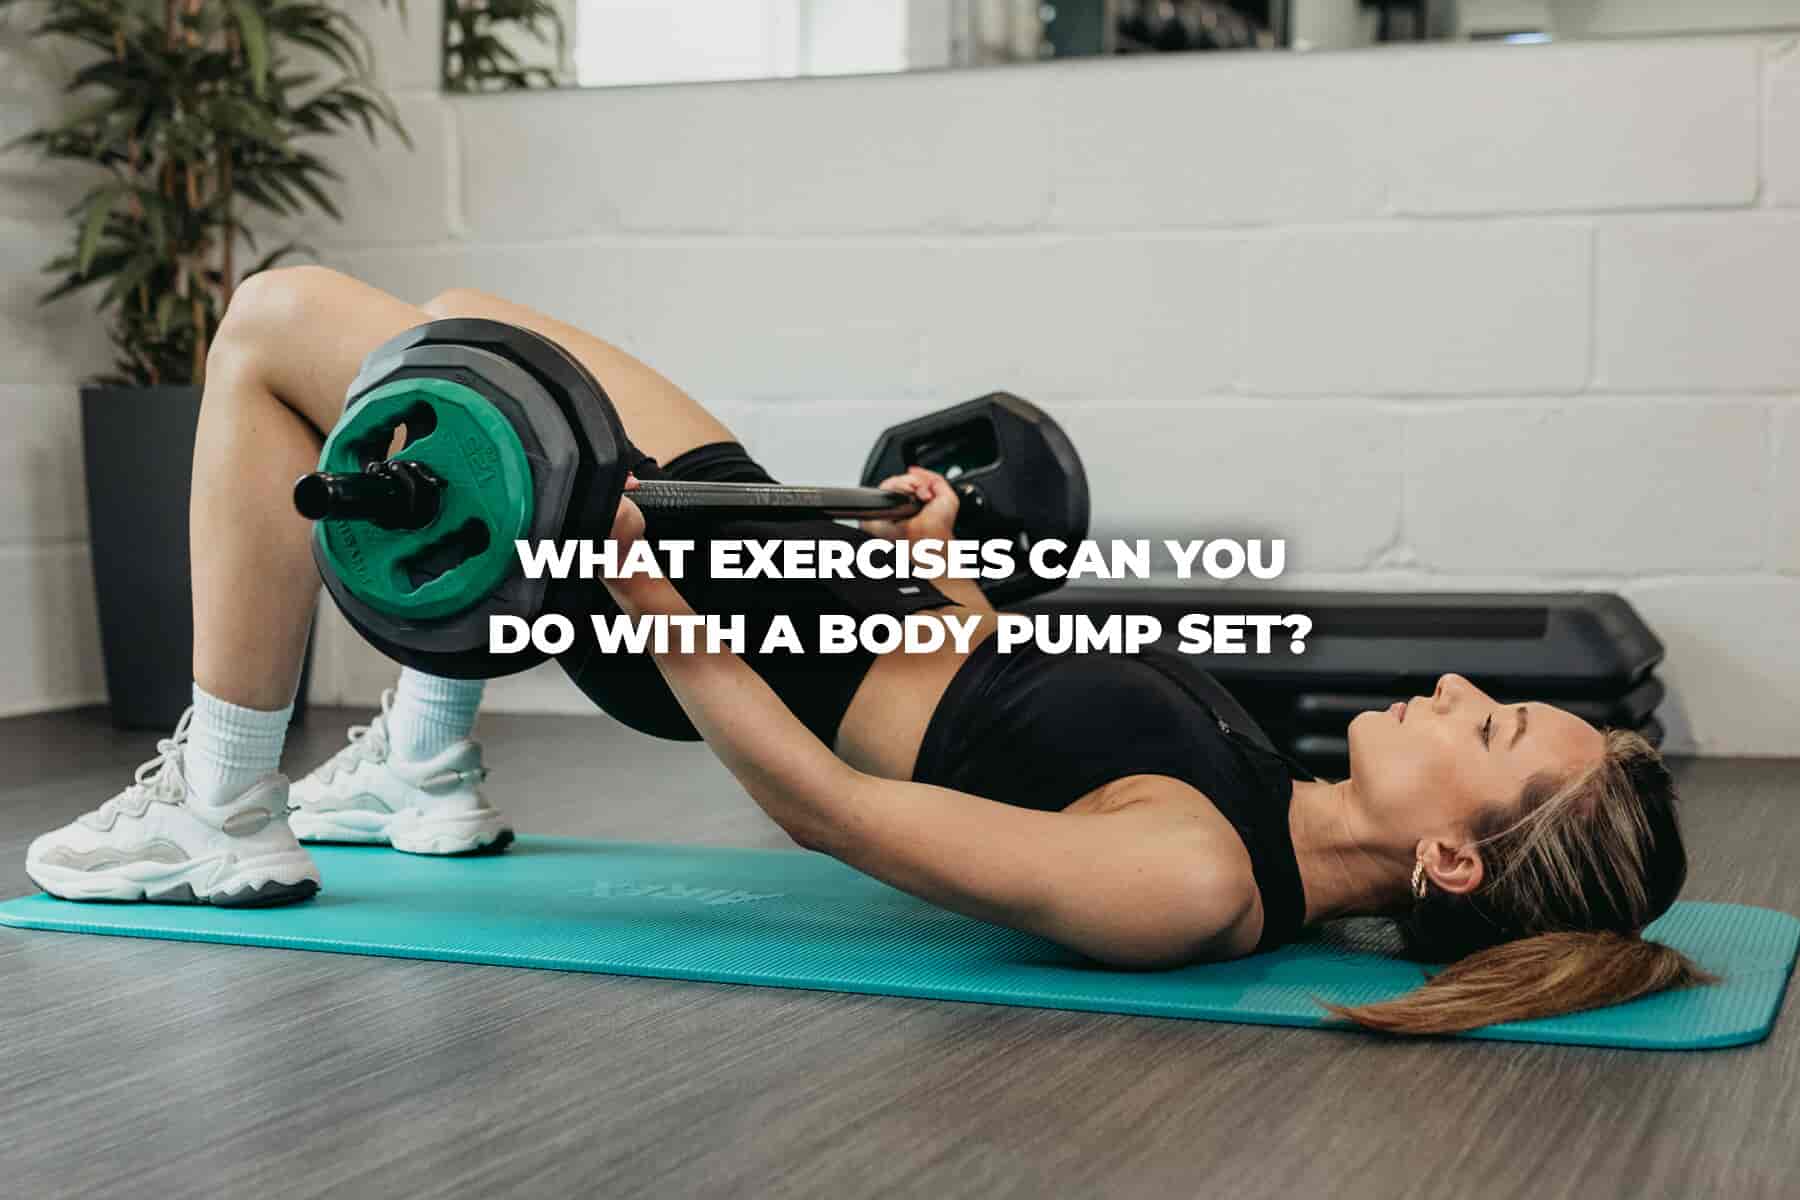 What exercises can you do with a Body Pump Set?